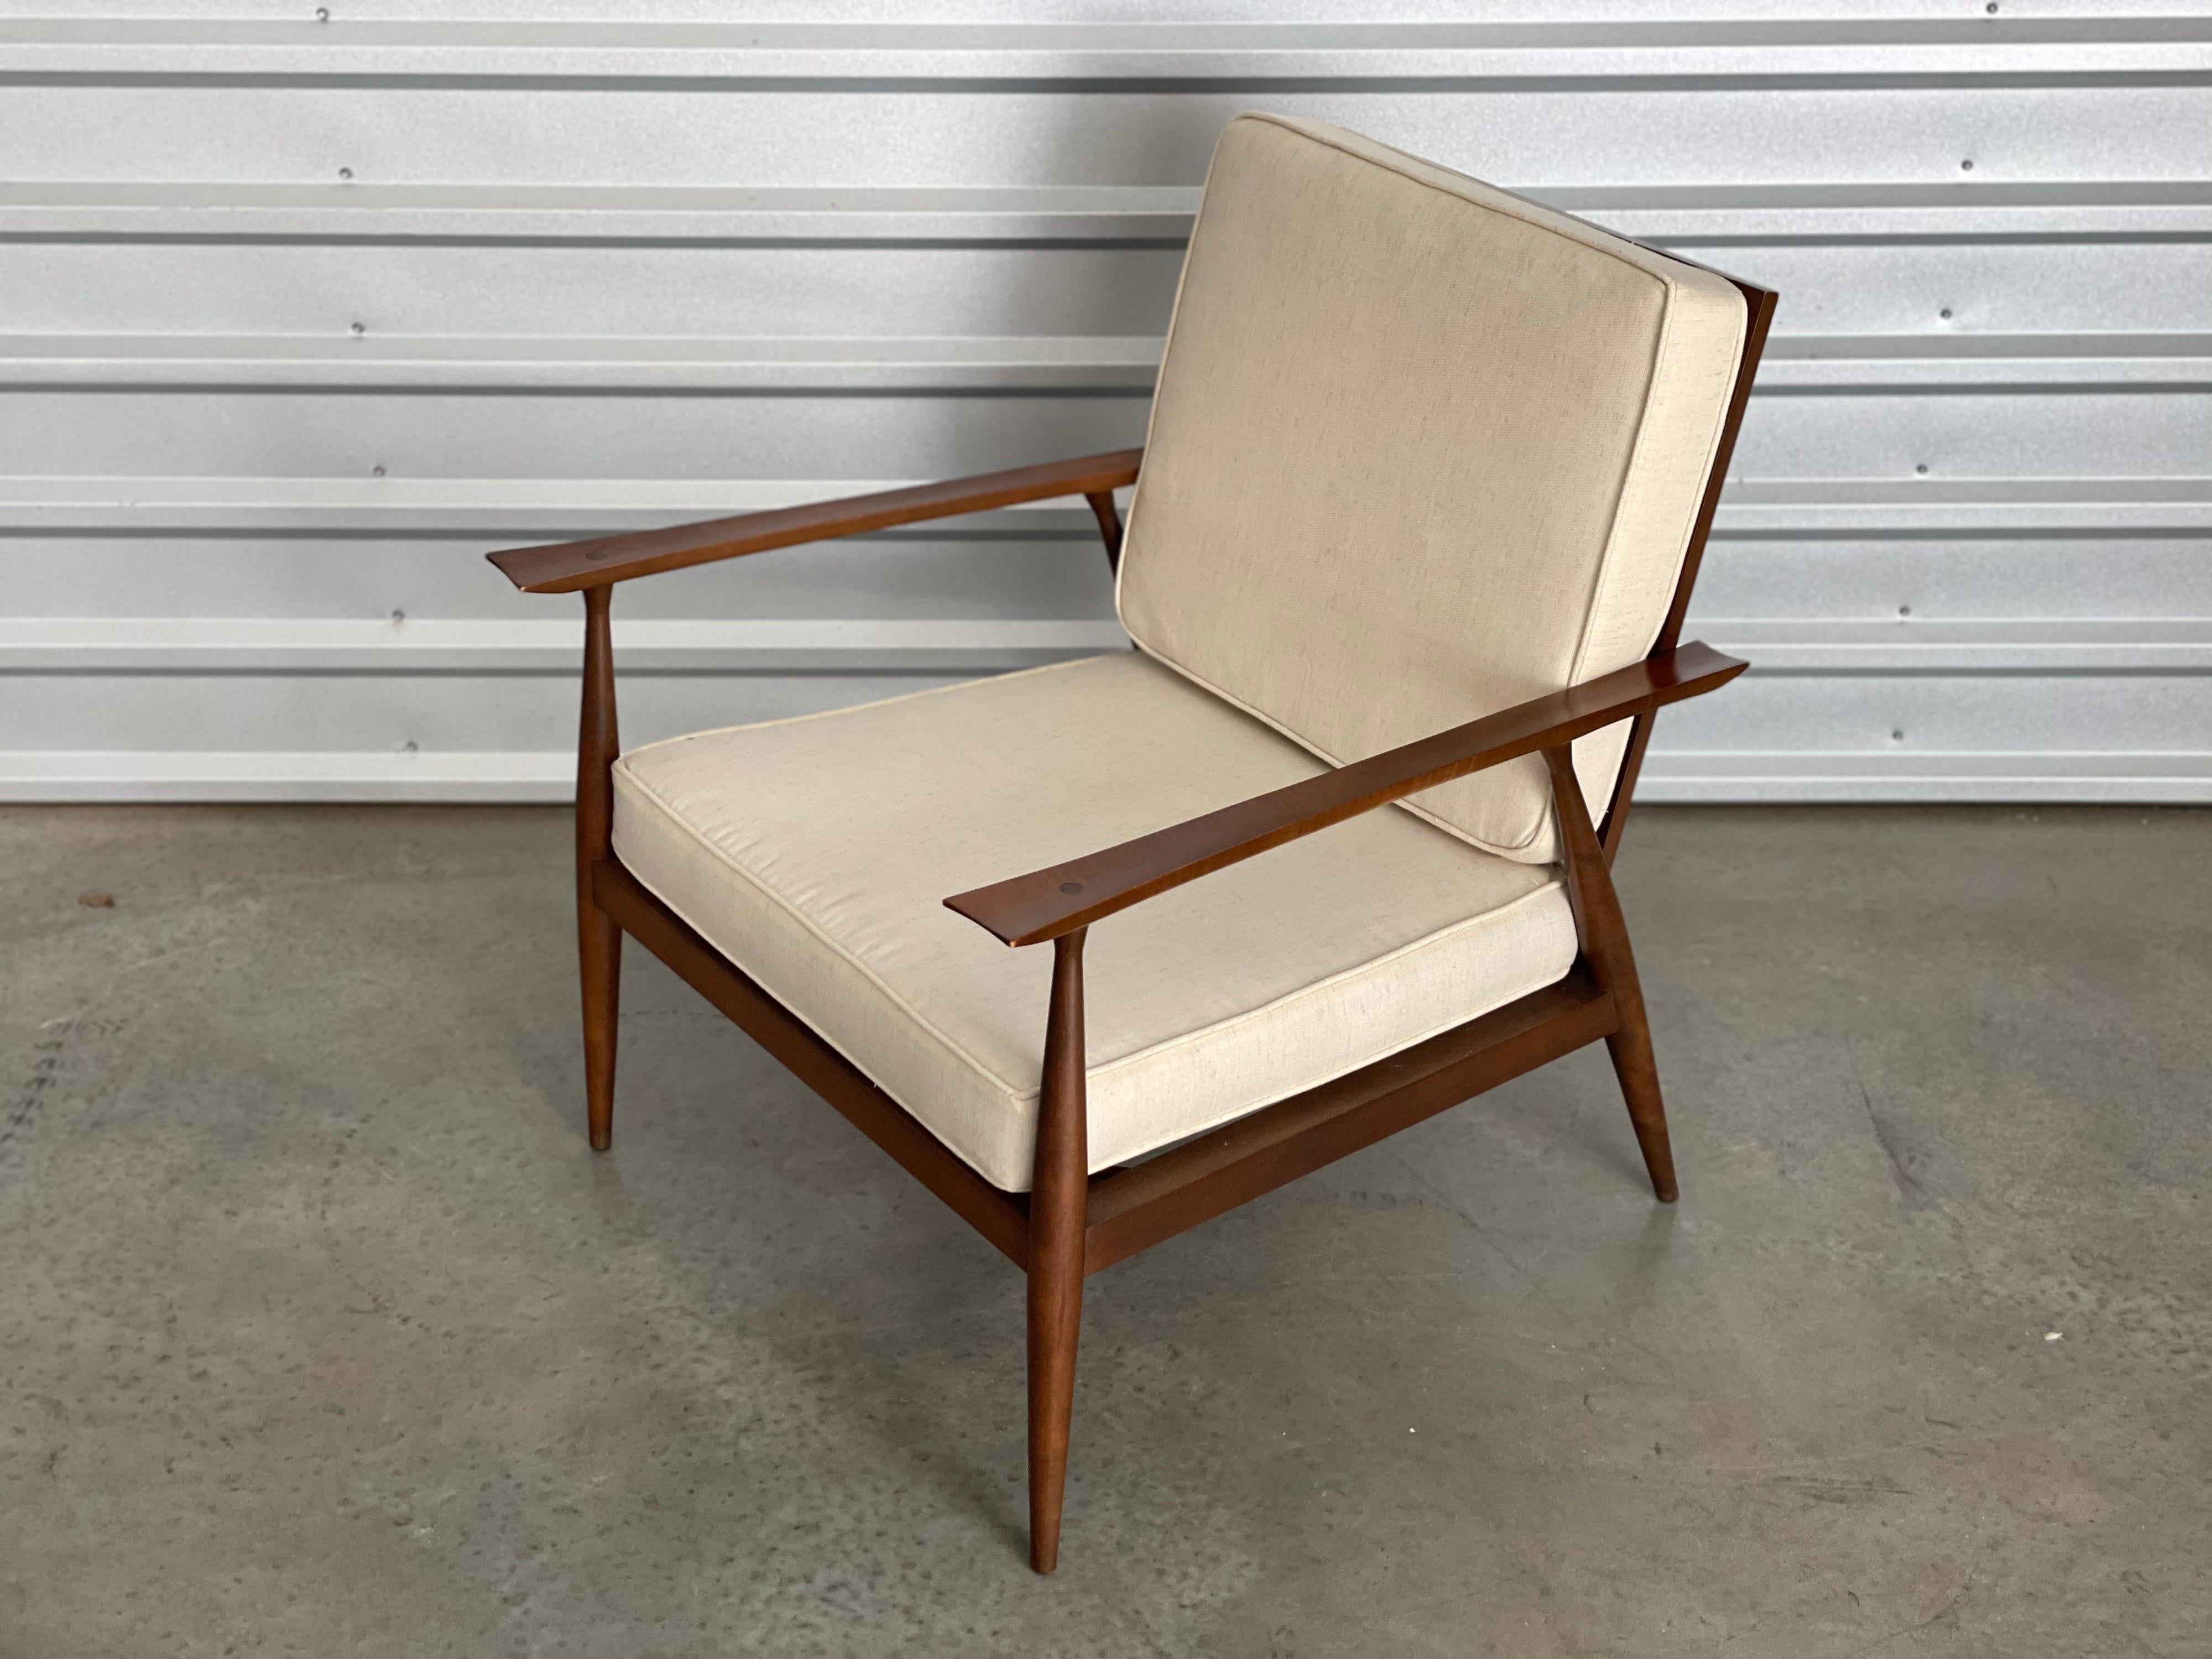 Very rare lounge chair by Paul McCobb for Winchendon. This model is rarely seen. I love the flared and sculpted arms that have nice wood dowels and the rail wooden back that shows the lines and cushions marvelously. This model of Paul McCobb